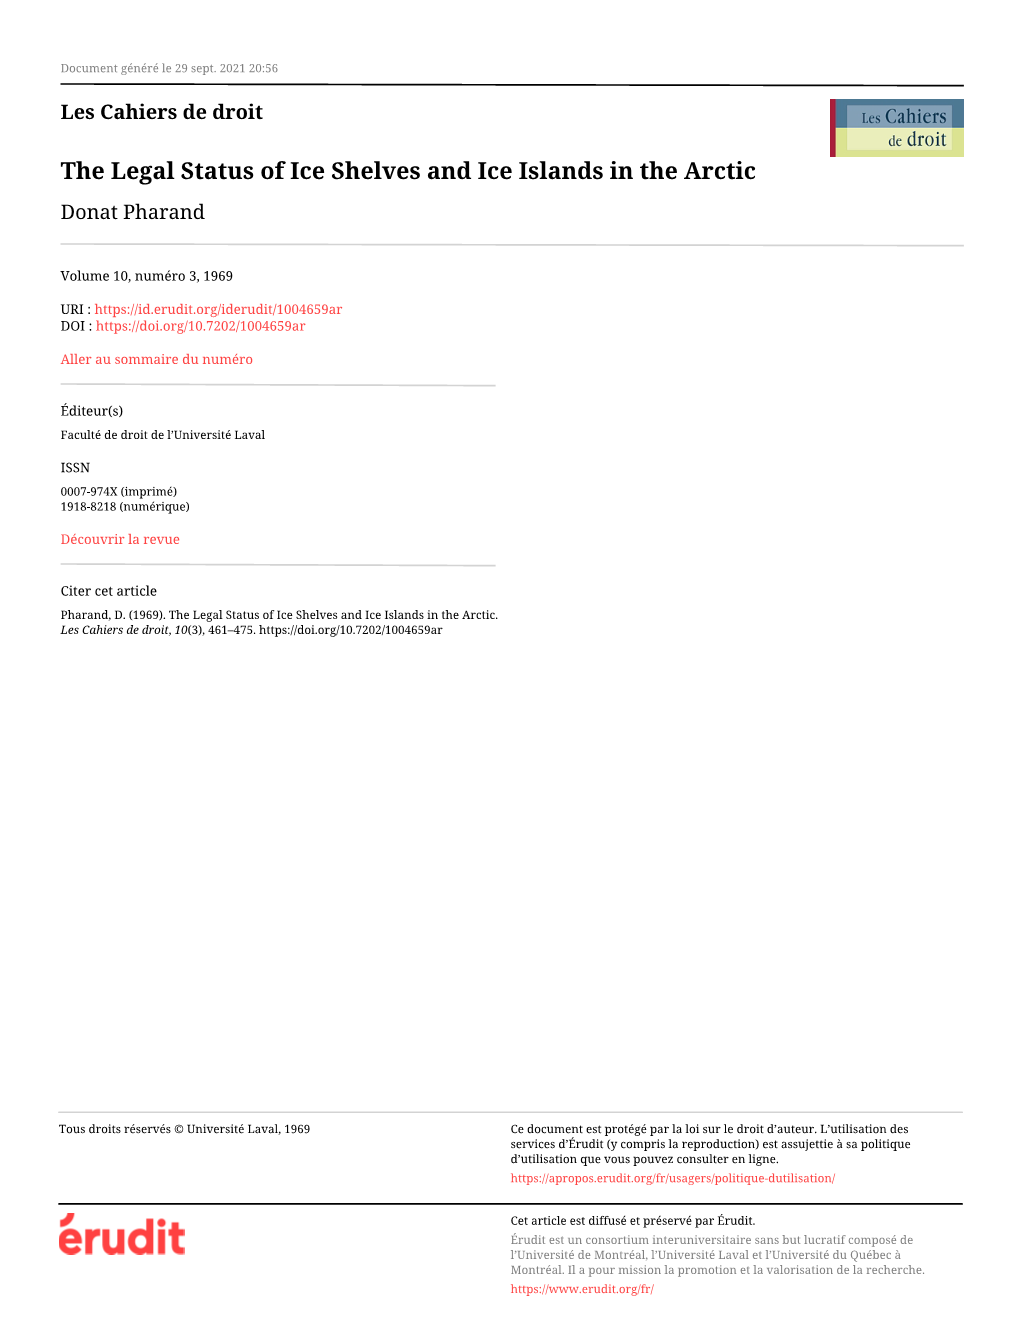 The Legal Status of Ice Shelves and Ice Islands in the Arctic Donat Pharand